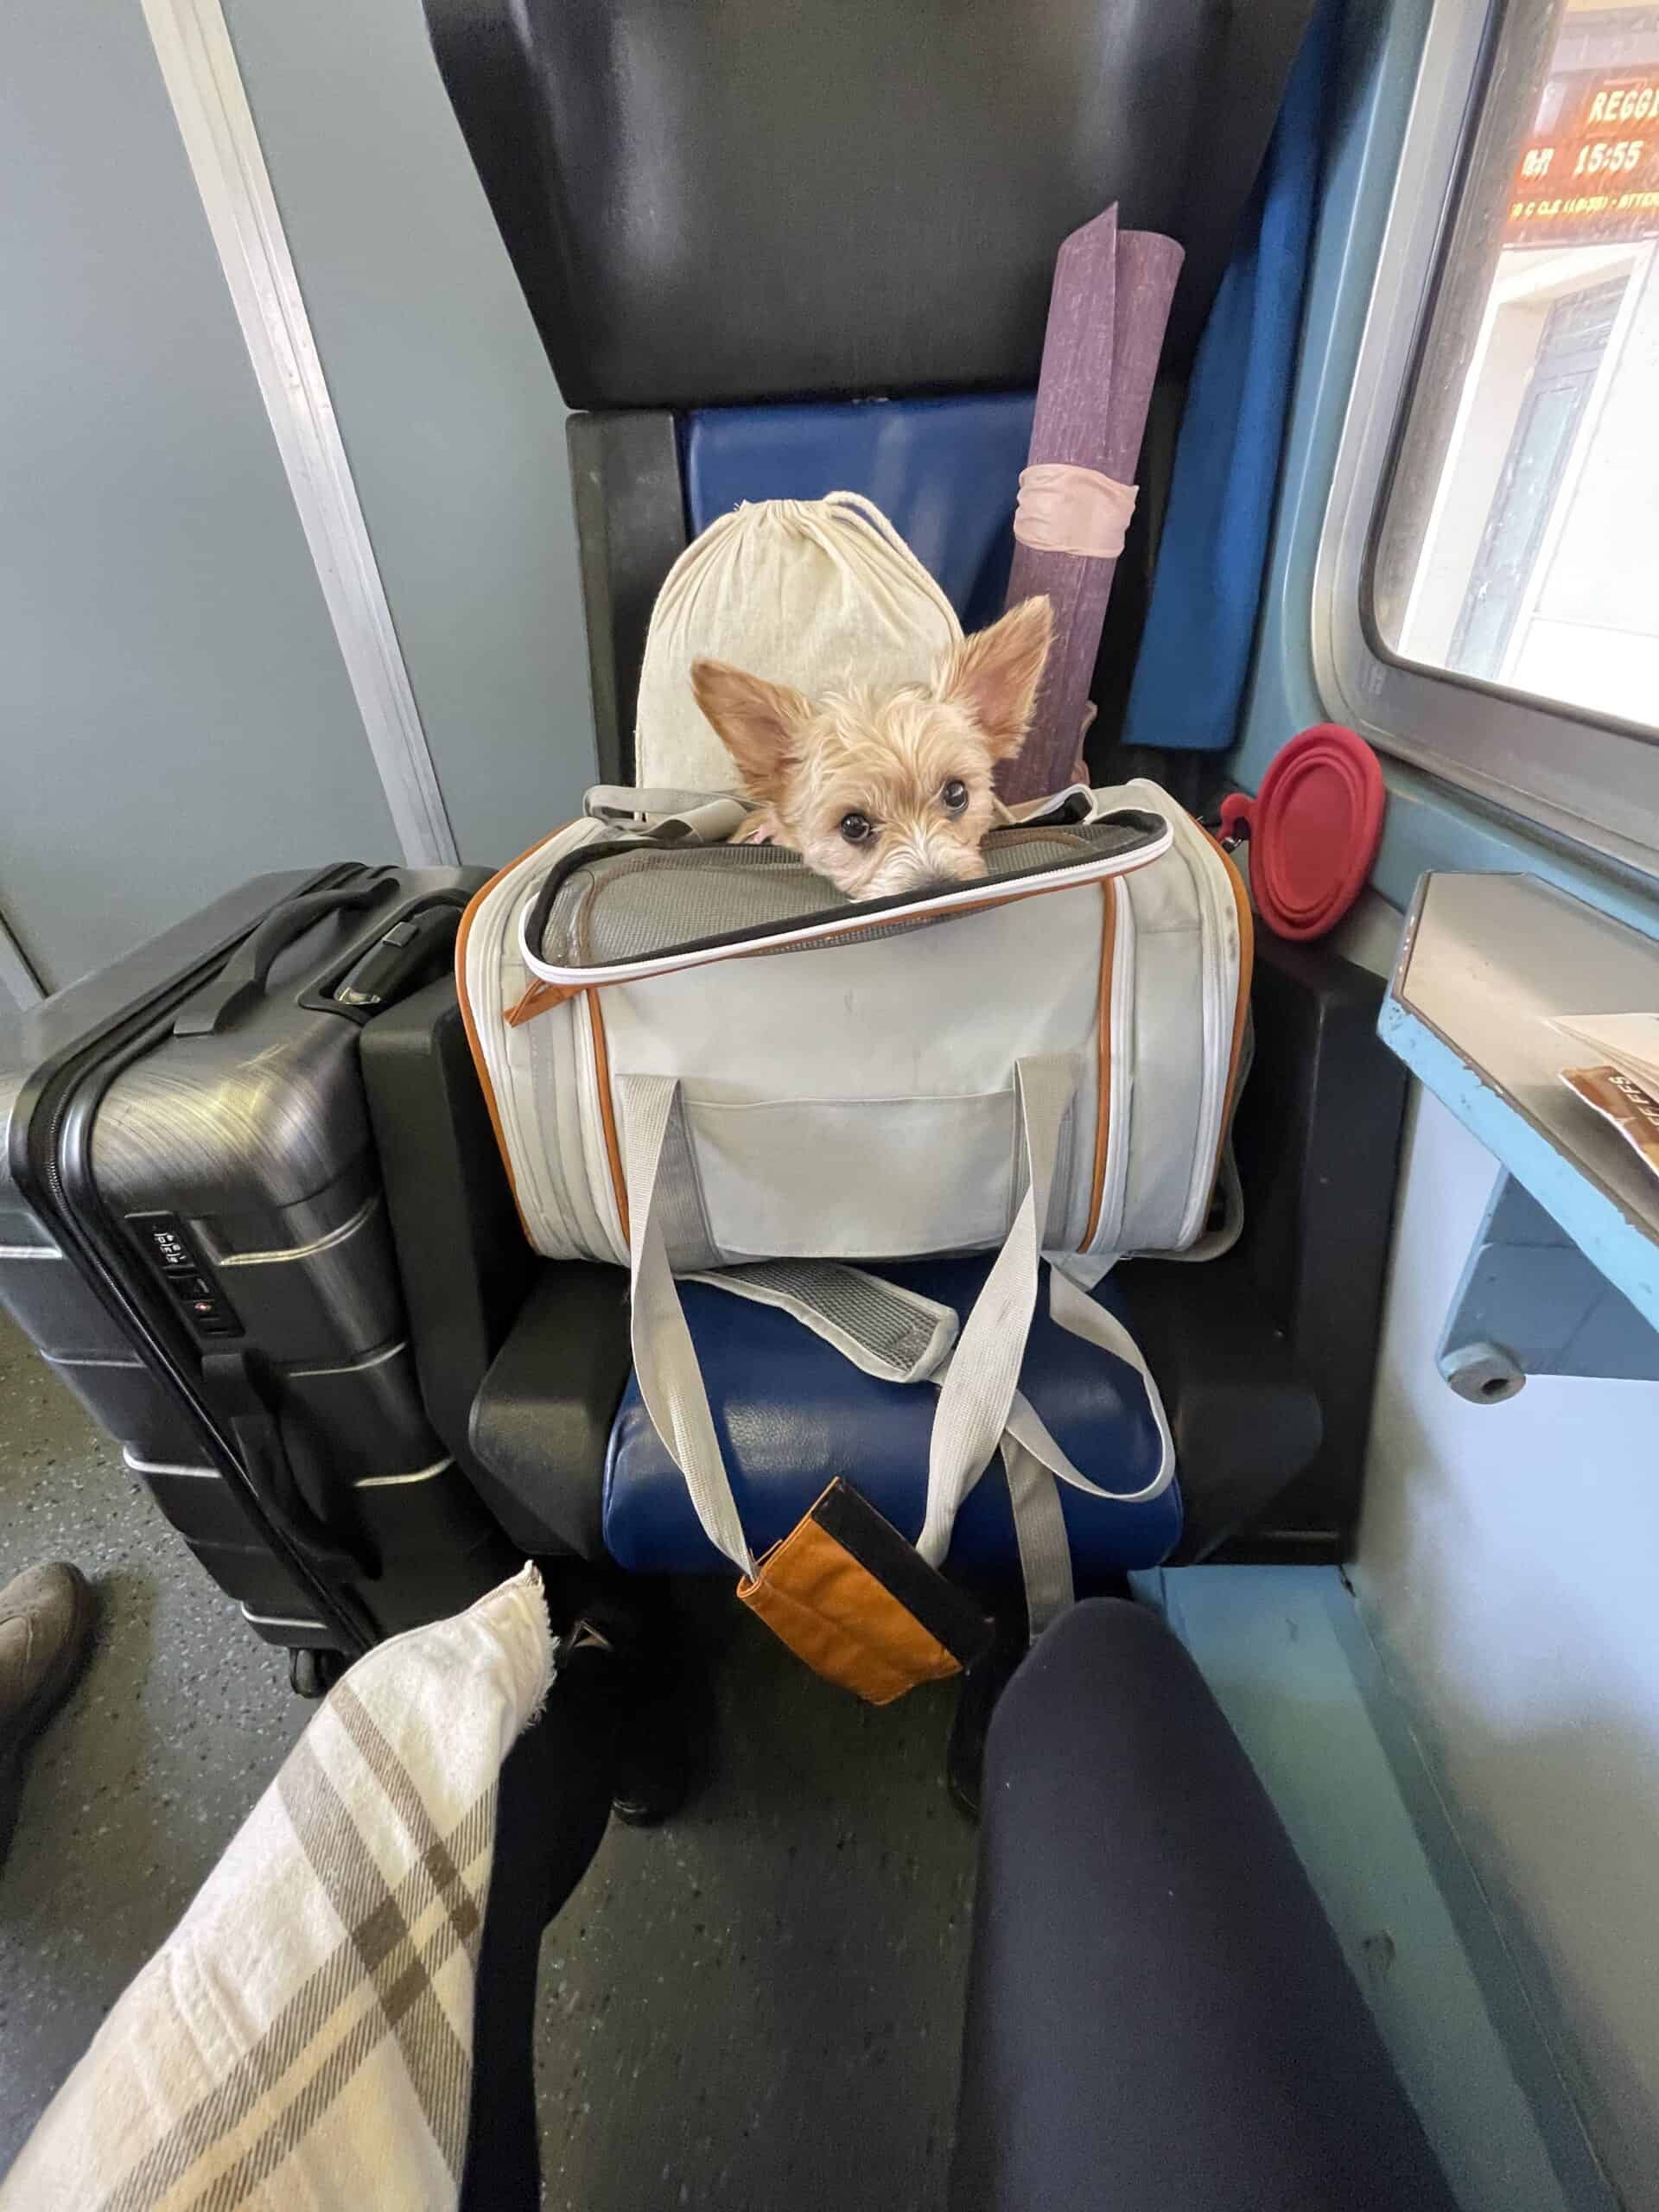 Sheila resting in her bag on Trenitalia as we traveled through Italy 